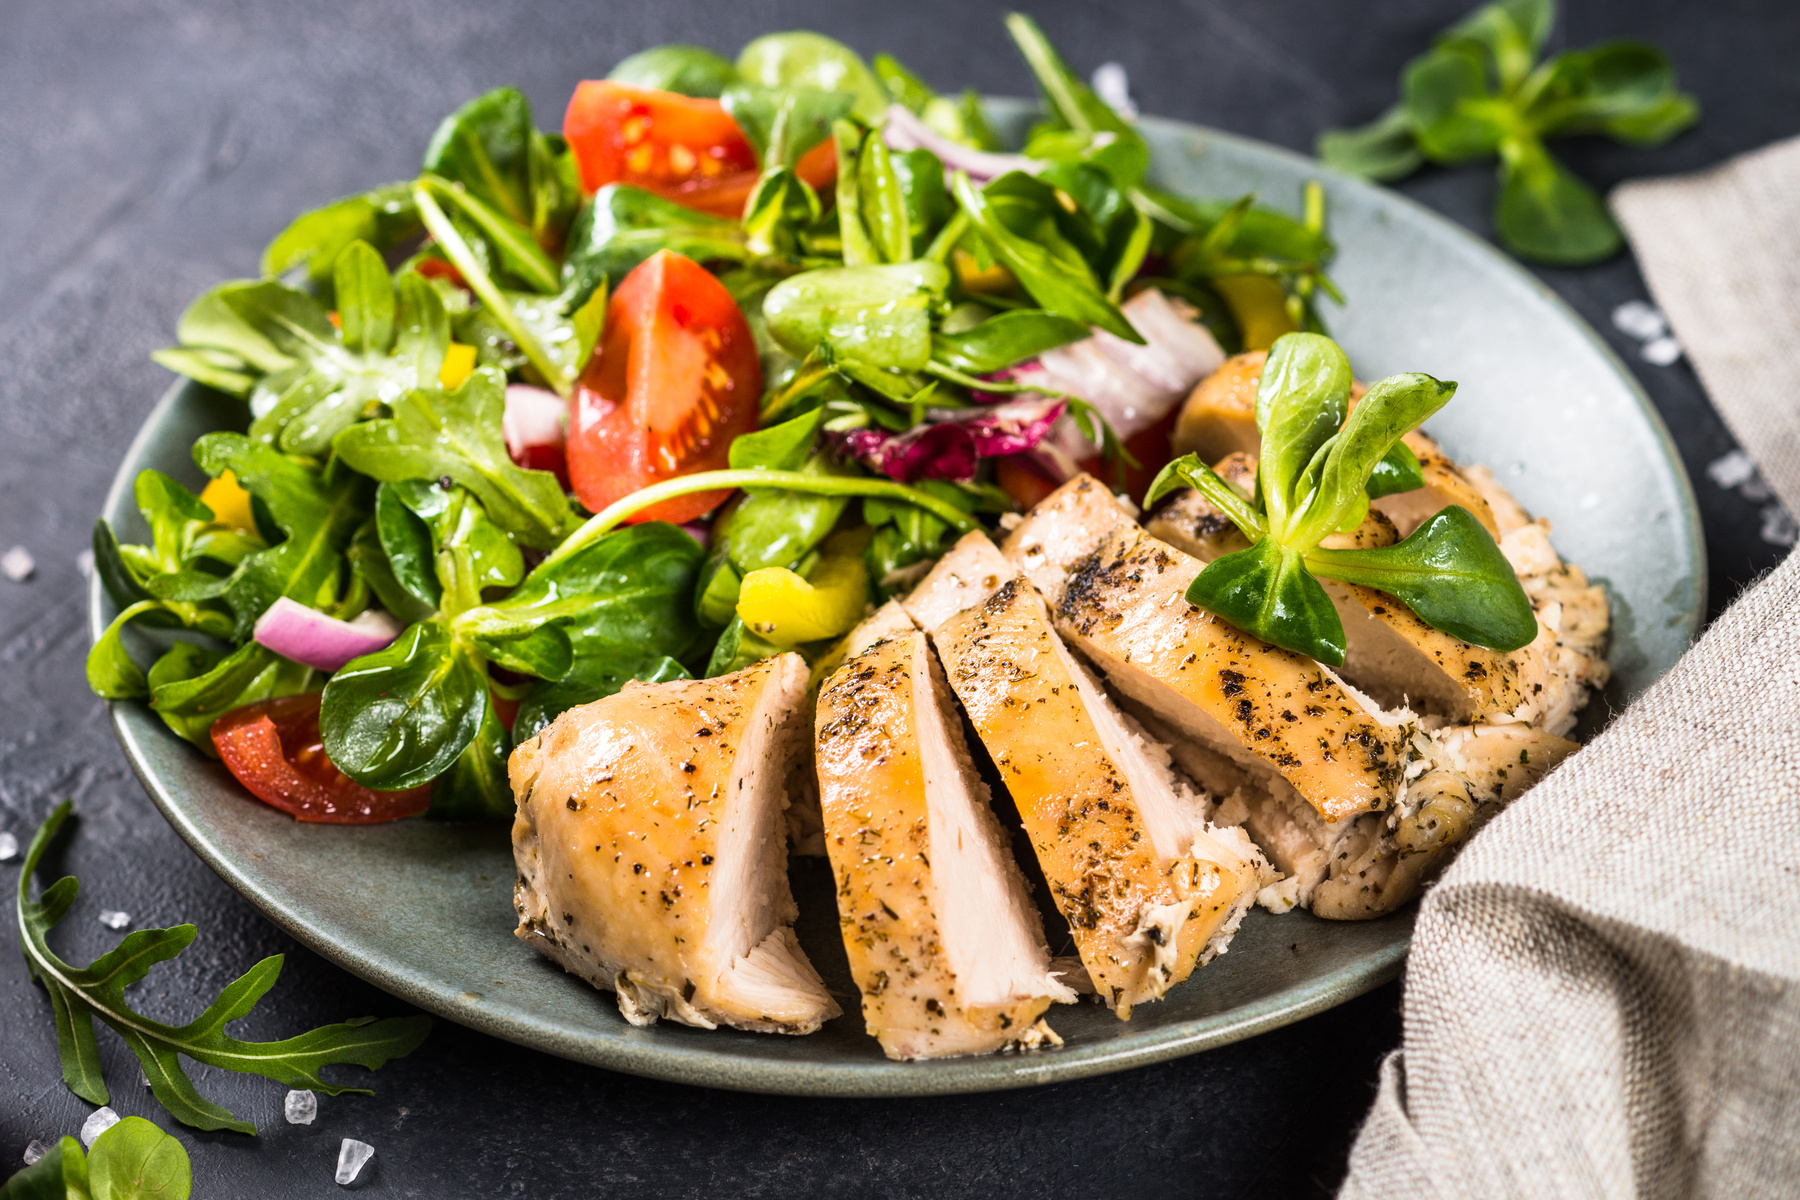 Healthy Chicken Dish with Salad